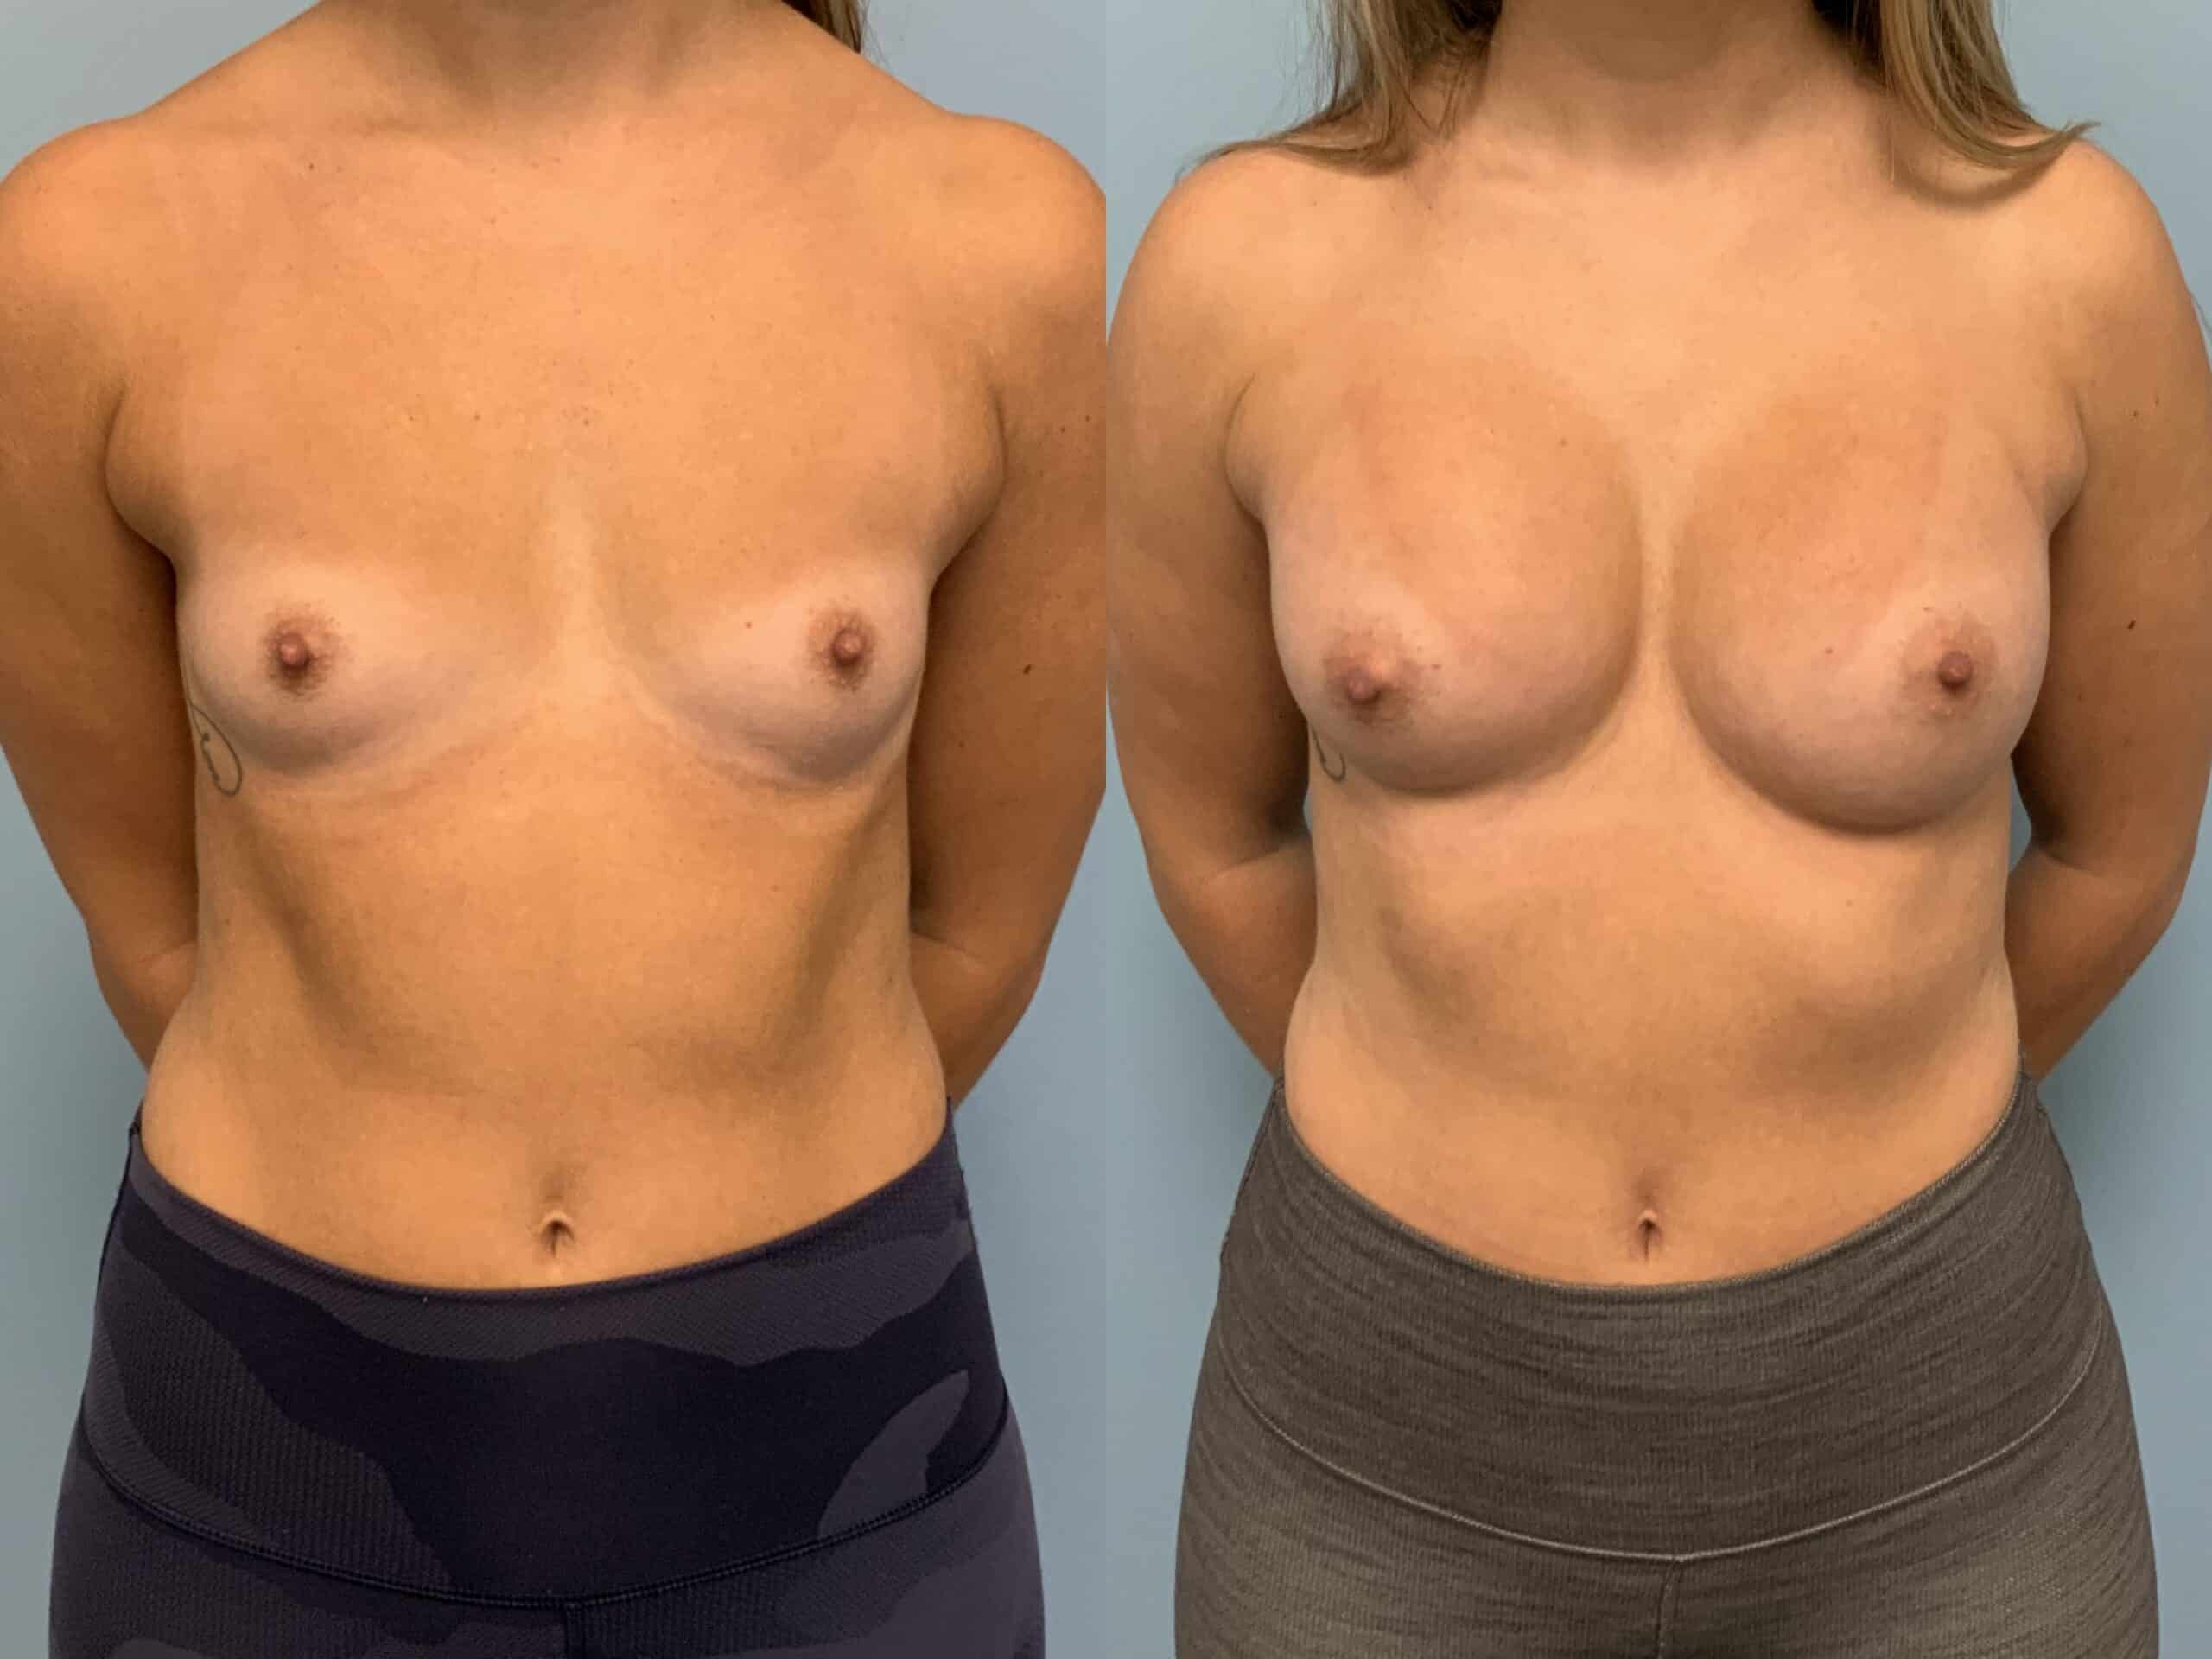 Before and after, Patient 7 mo post op from Breast Augmentation, Level III Muscle Release procedures performed by Dr. Paul Vanek